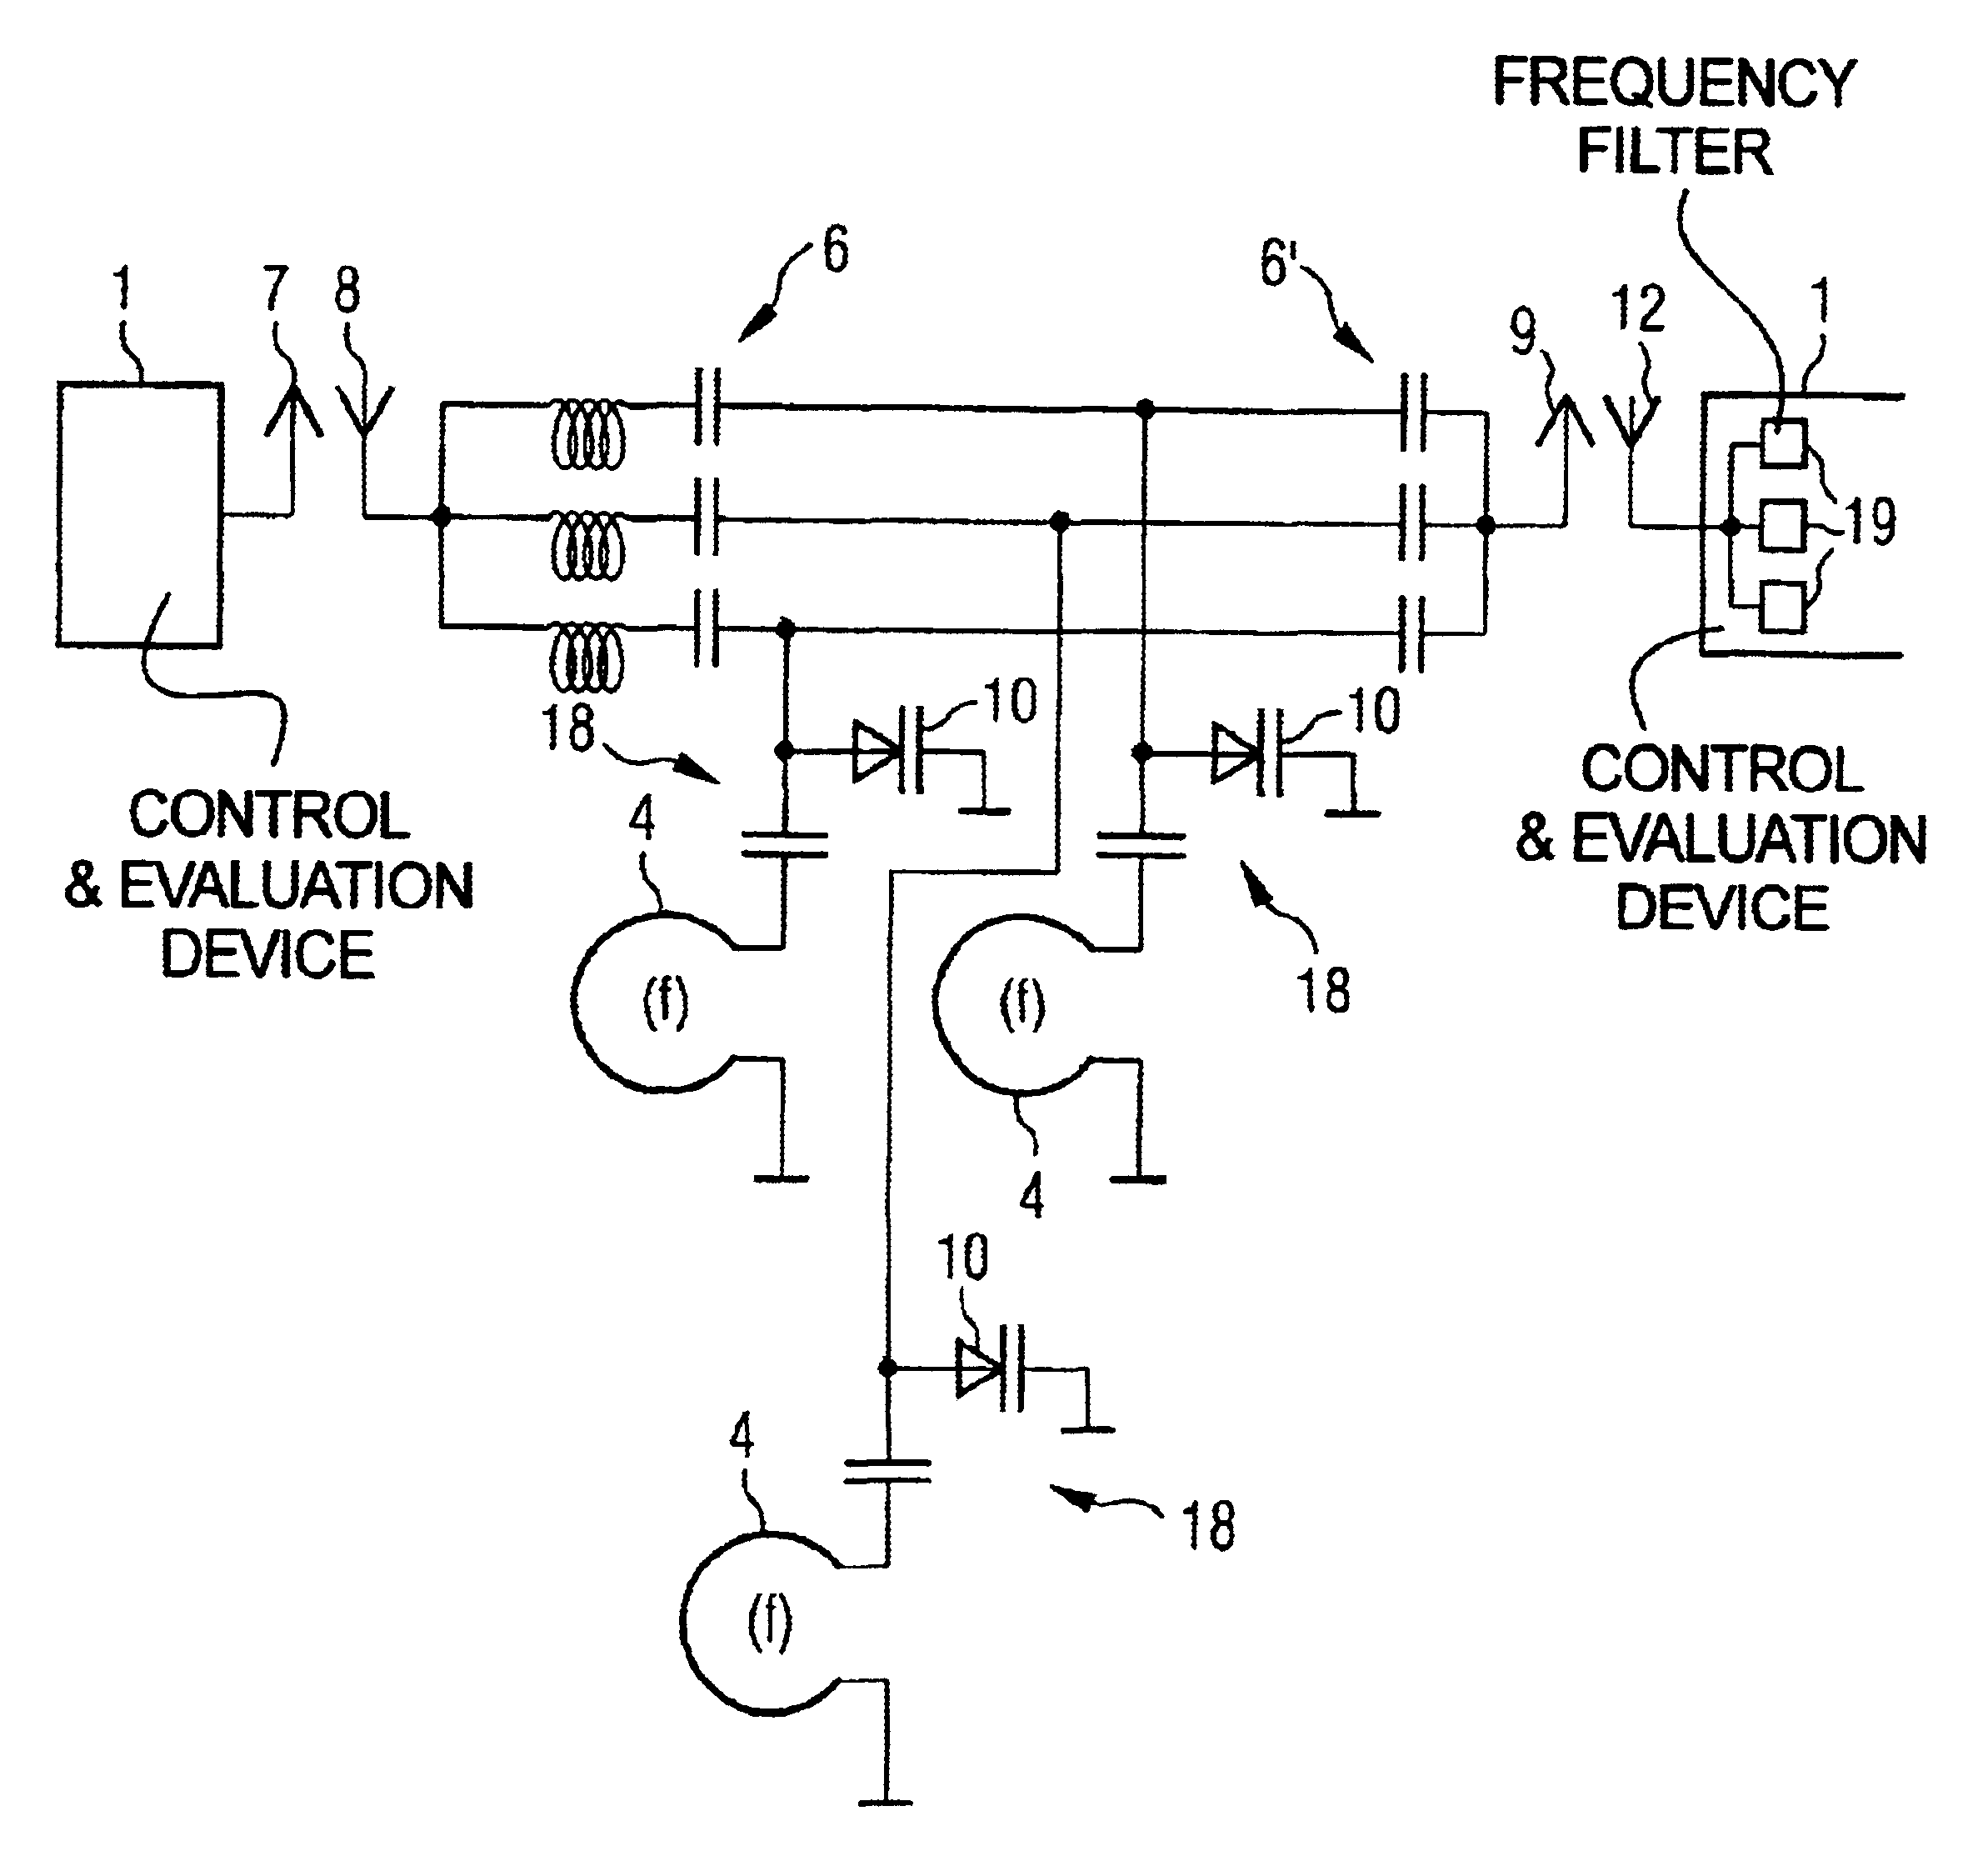 Method for communicating a magnetic resonance signal, and reception arrangement and magnetic resonance system operable in accord therewith